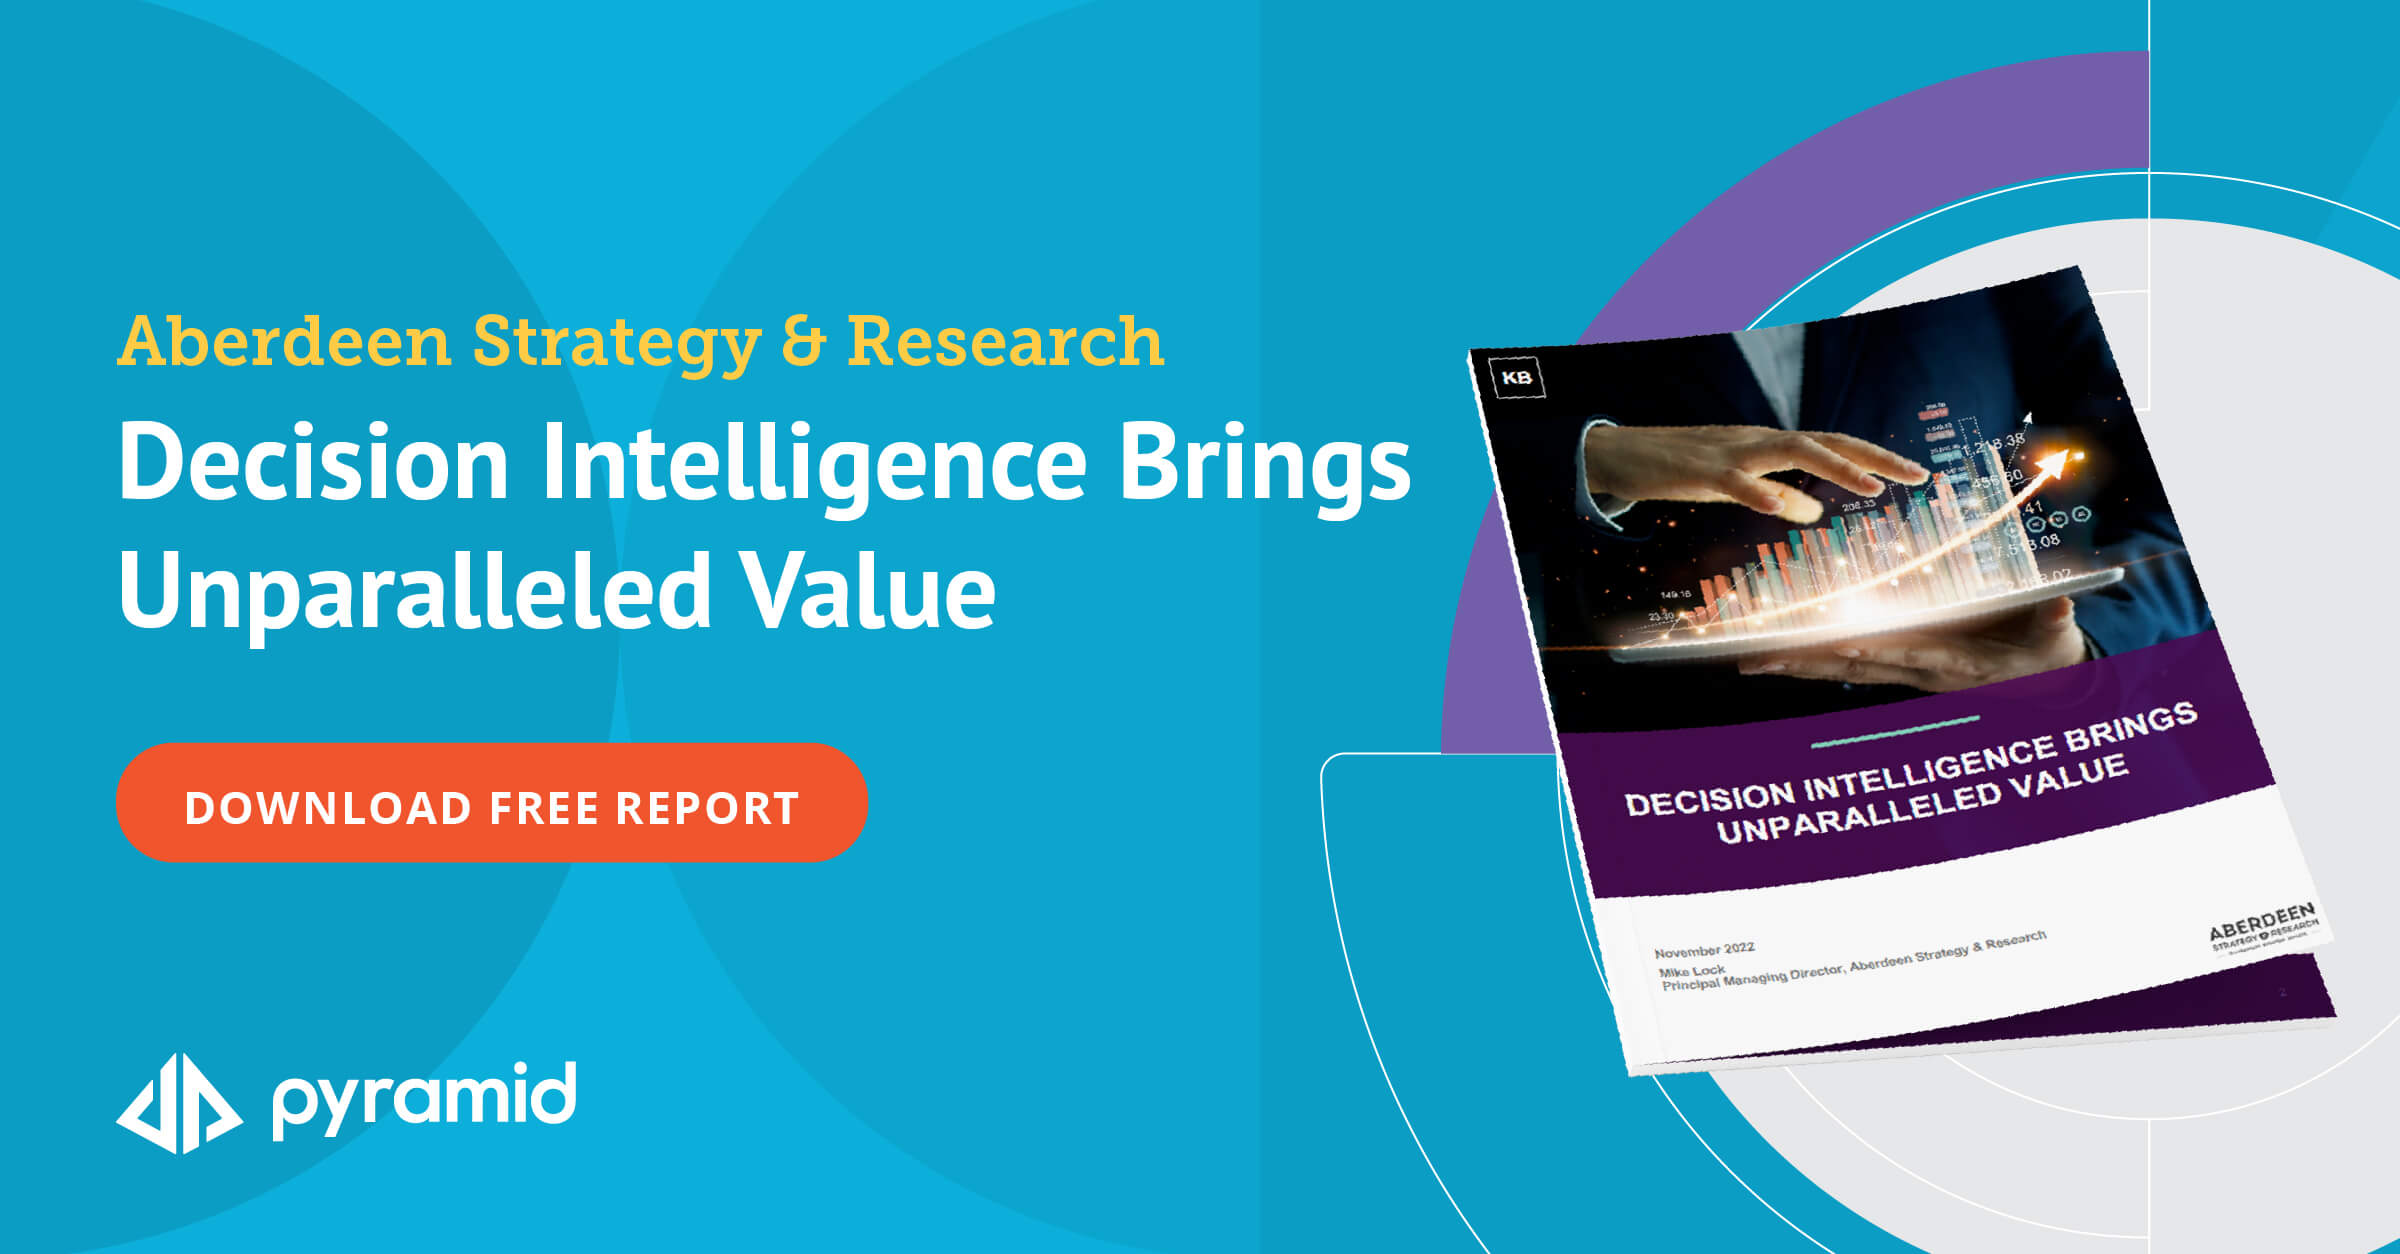 Decision Intelligence Brings Unparalleled Value Download Button